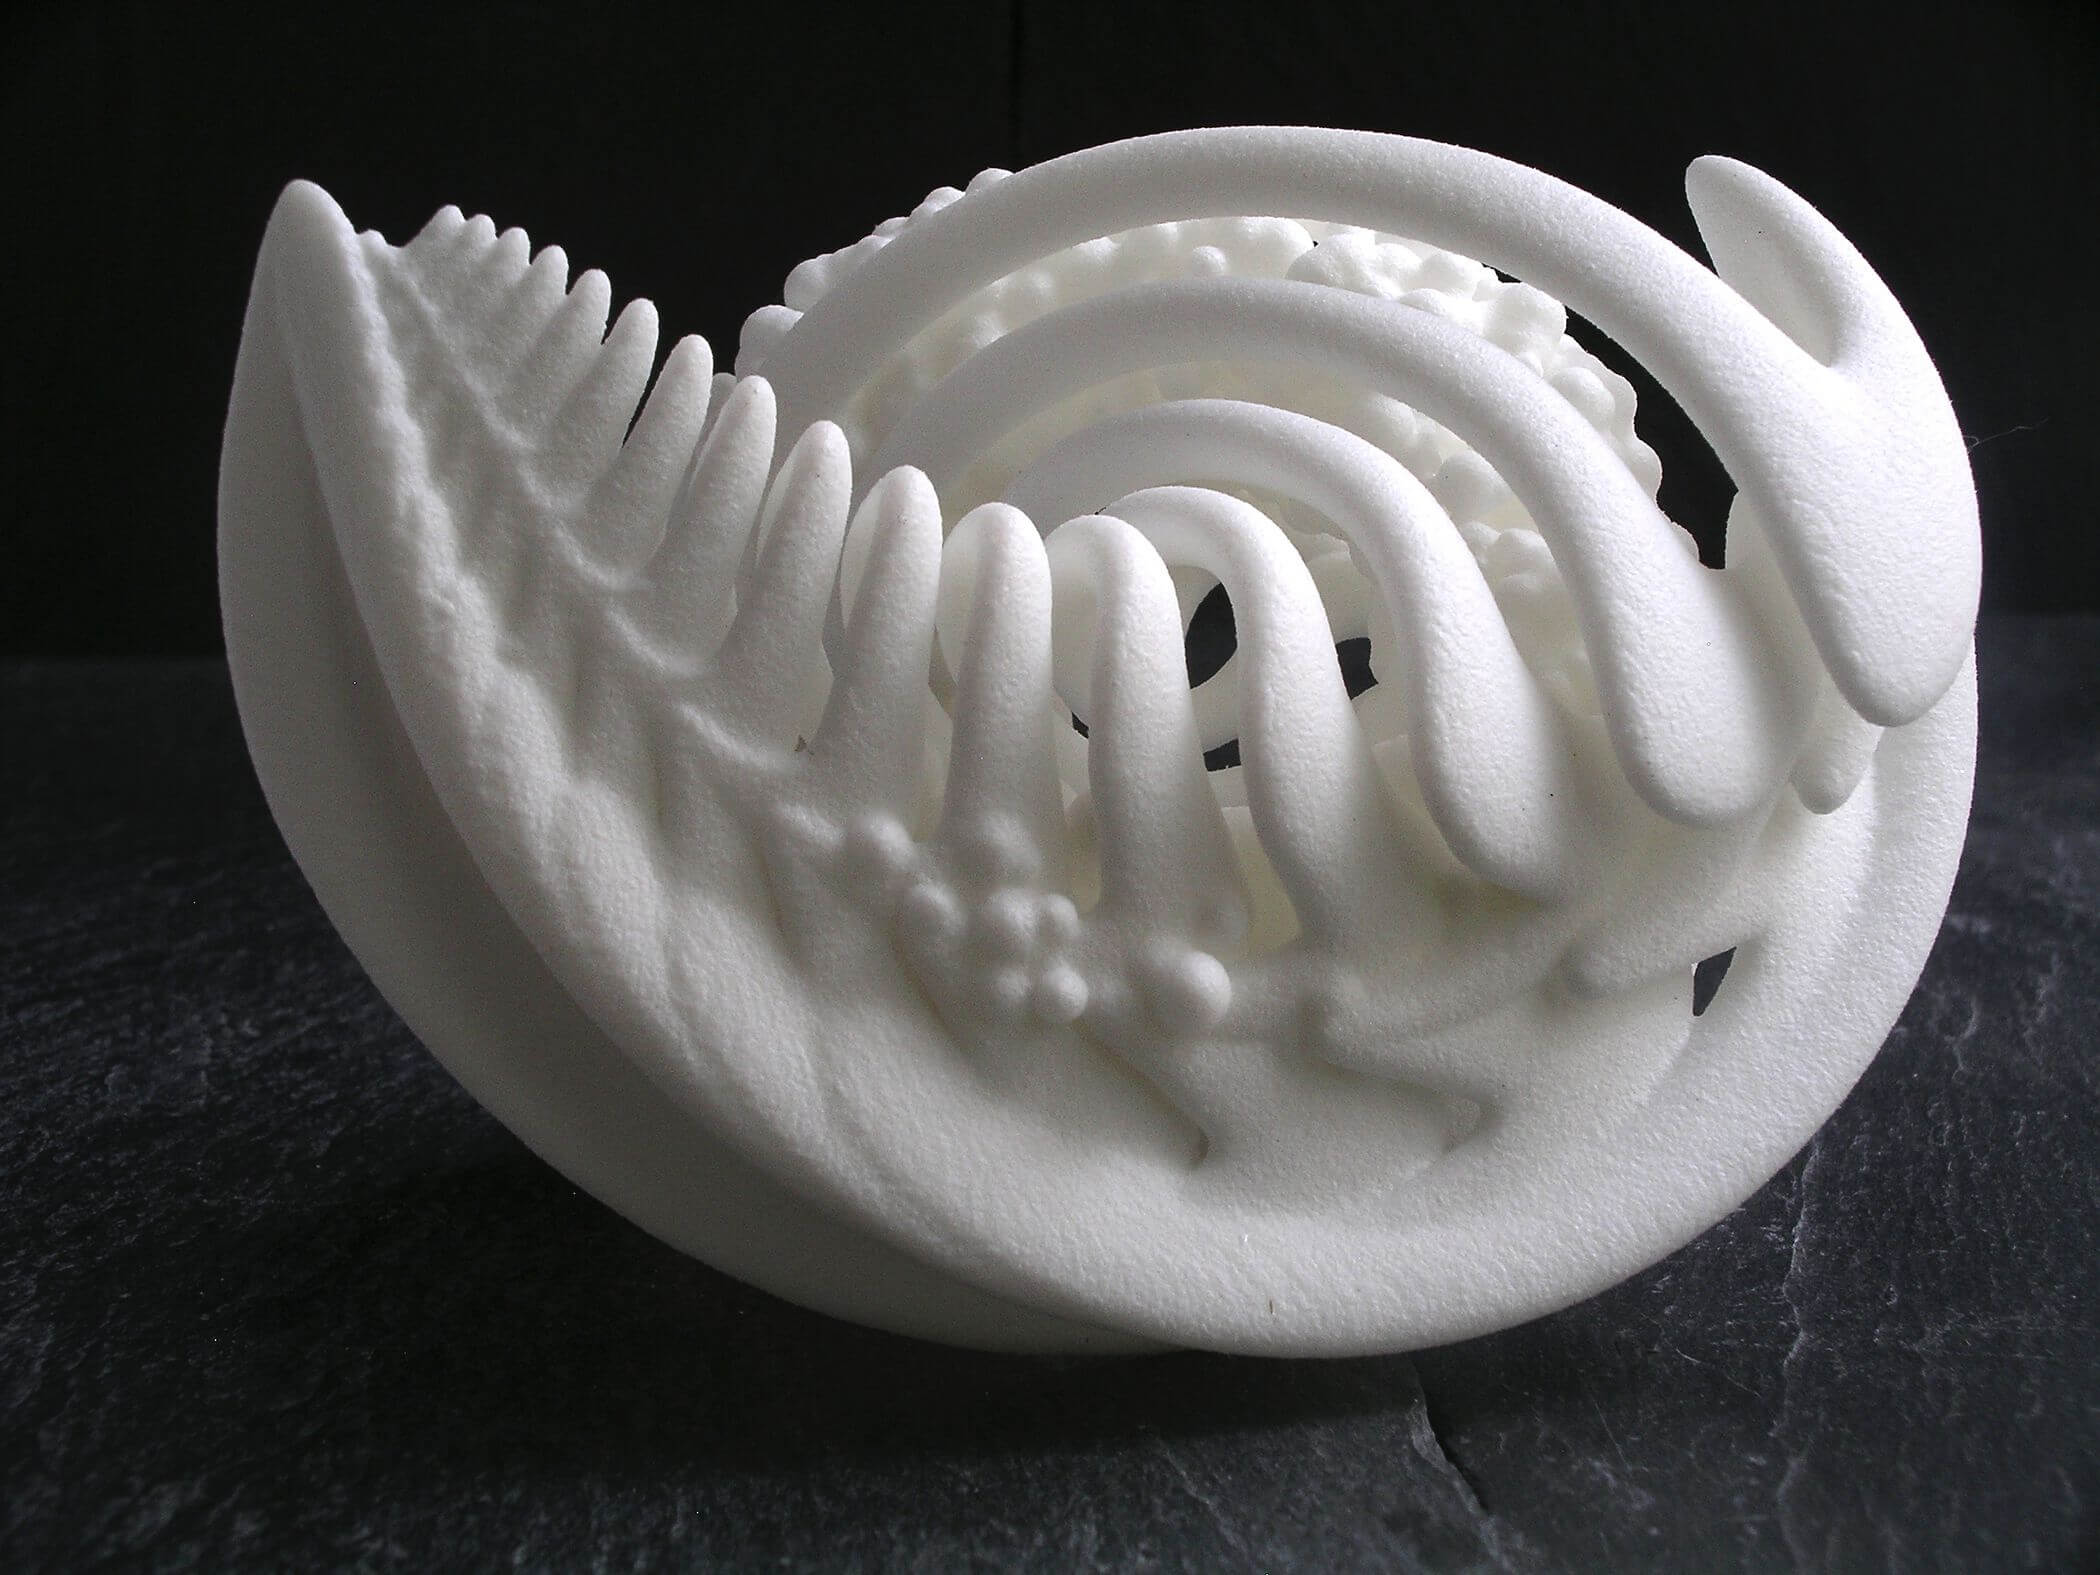 5 Mistakes To Avoid When Designing A 3D Model For 3D Pertaining To 3D Printer Templates